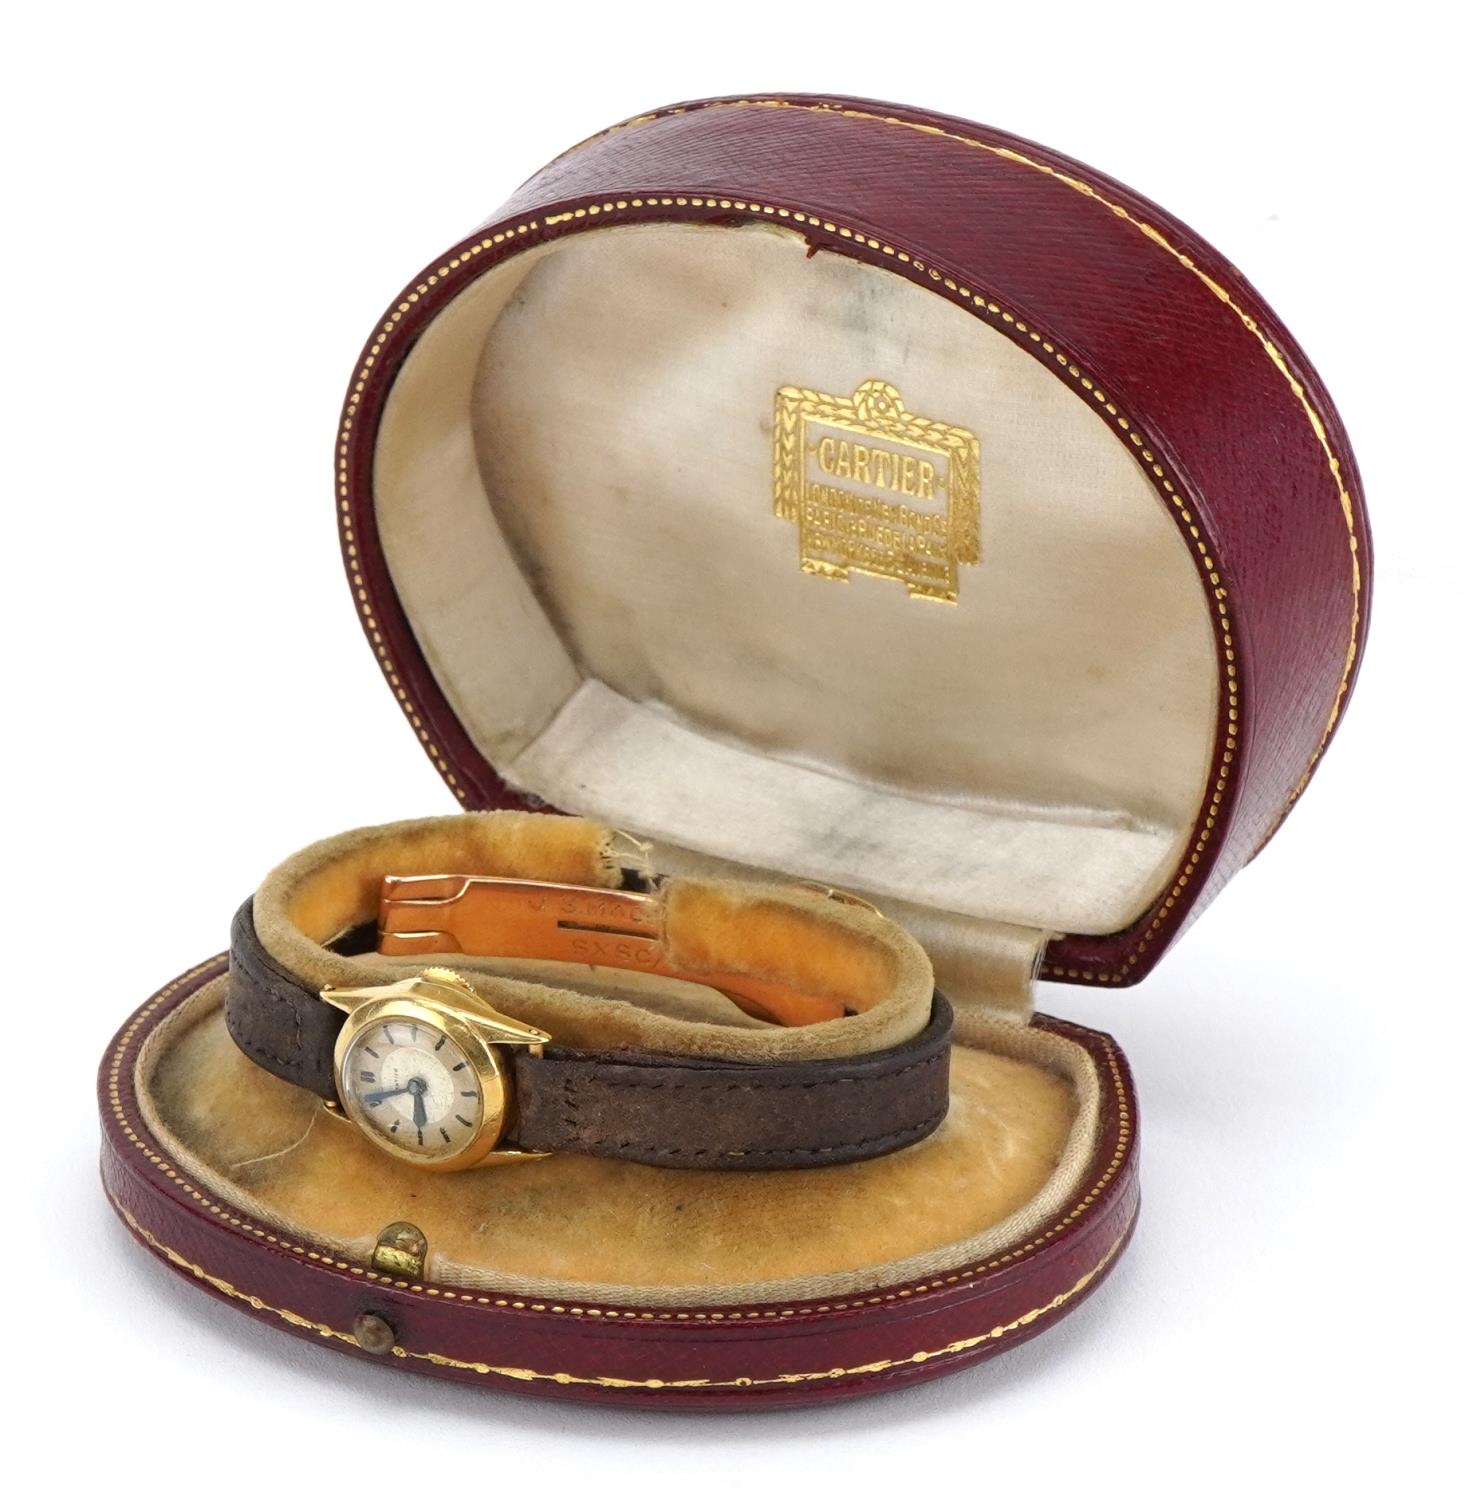 Cartier, early 20th century ladies gold Cartier wristwatch with leather strap and 18ct gold strap - Image 2 of 8